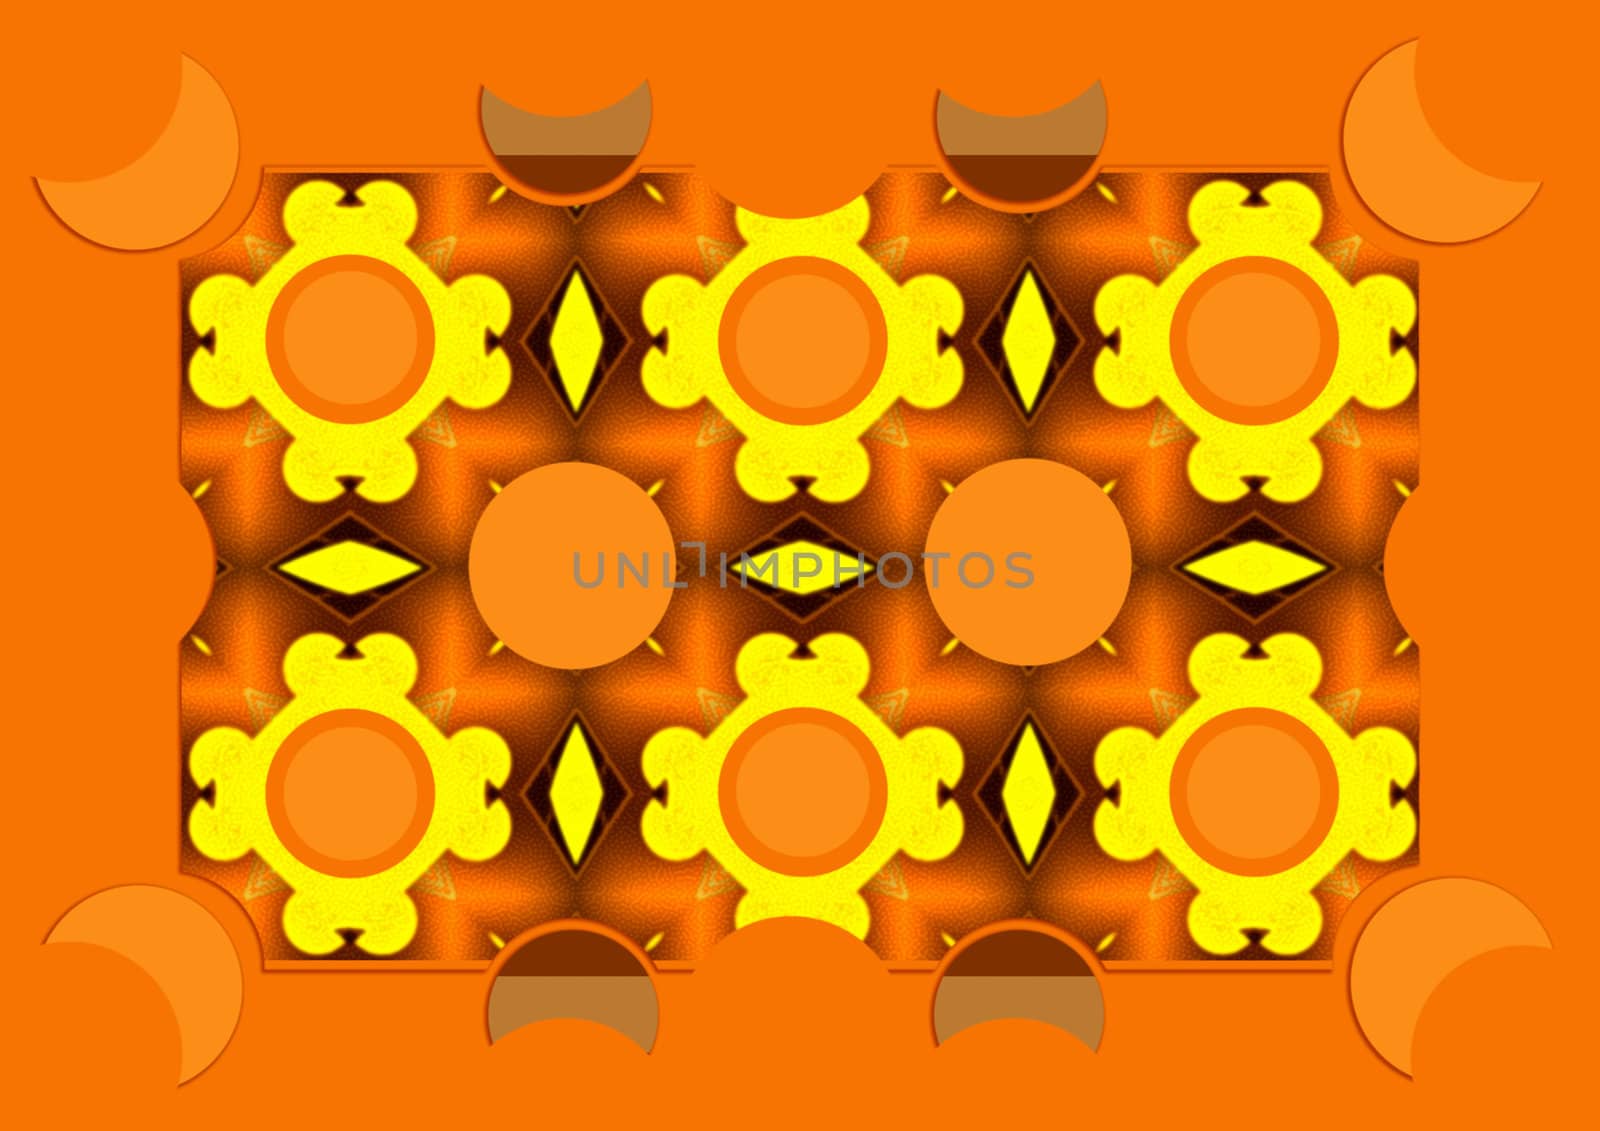 creative image of the bright orange background with abstract yellow sunflower